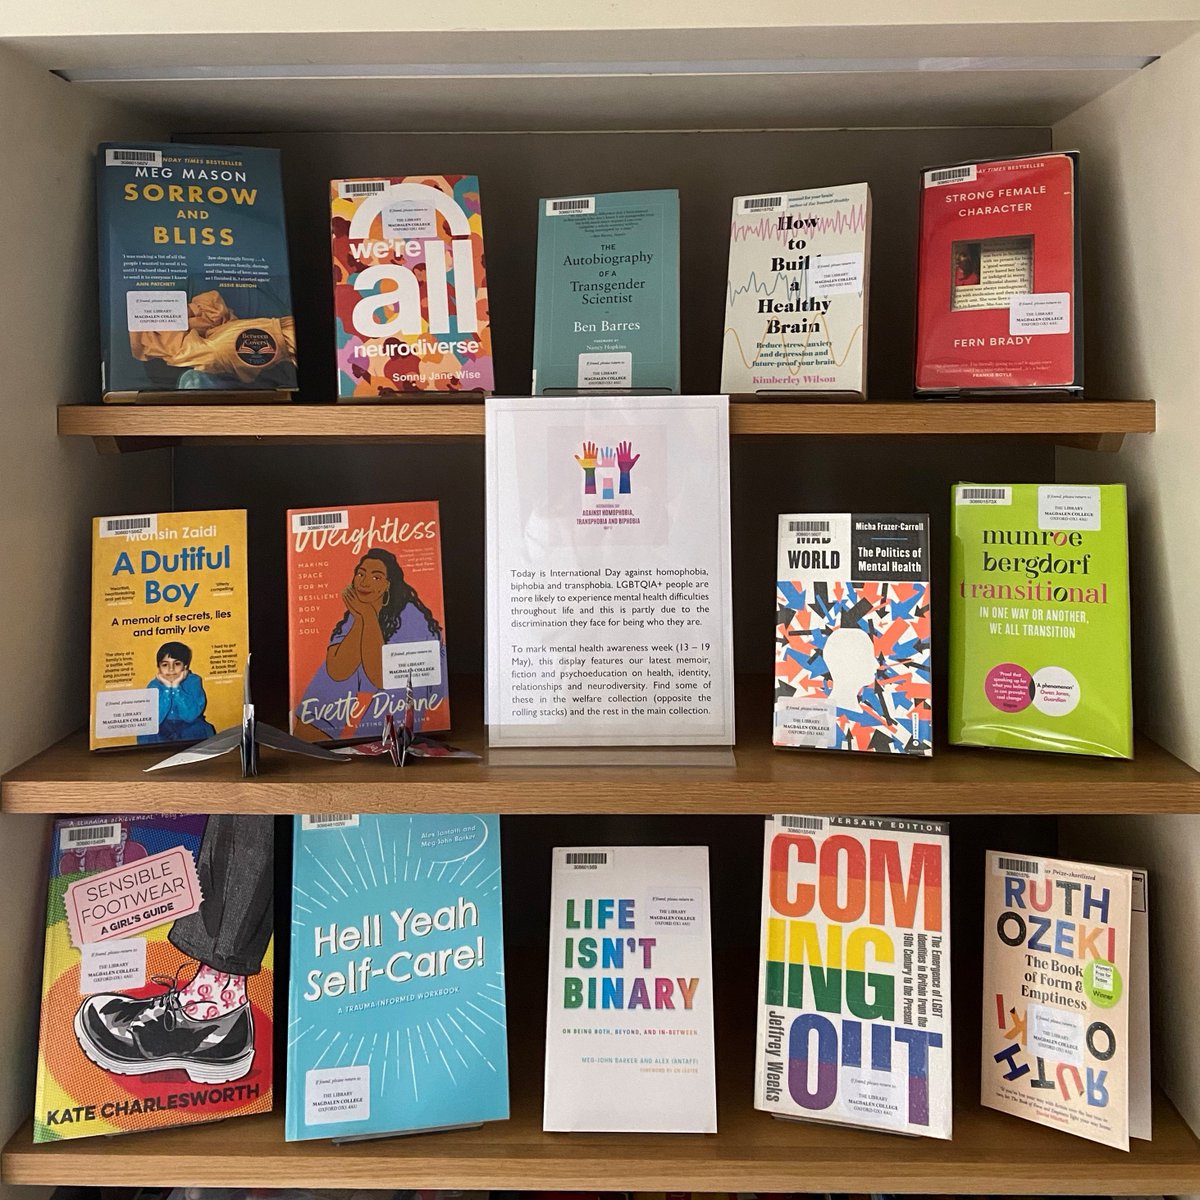 This display features some of our latest welfare collection acquisitions, plus new memoir, fiction and LGBTQIA+ non-fiction, to mark mental health awareness week (13 - 19 May) and international day against homophobia, biphobia and transphobia (17 May).